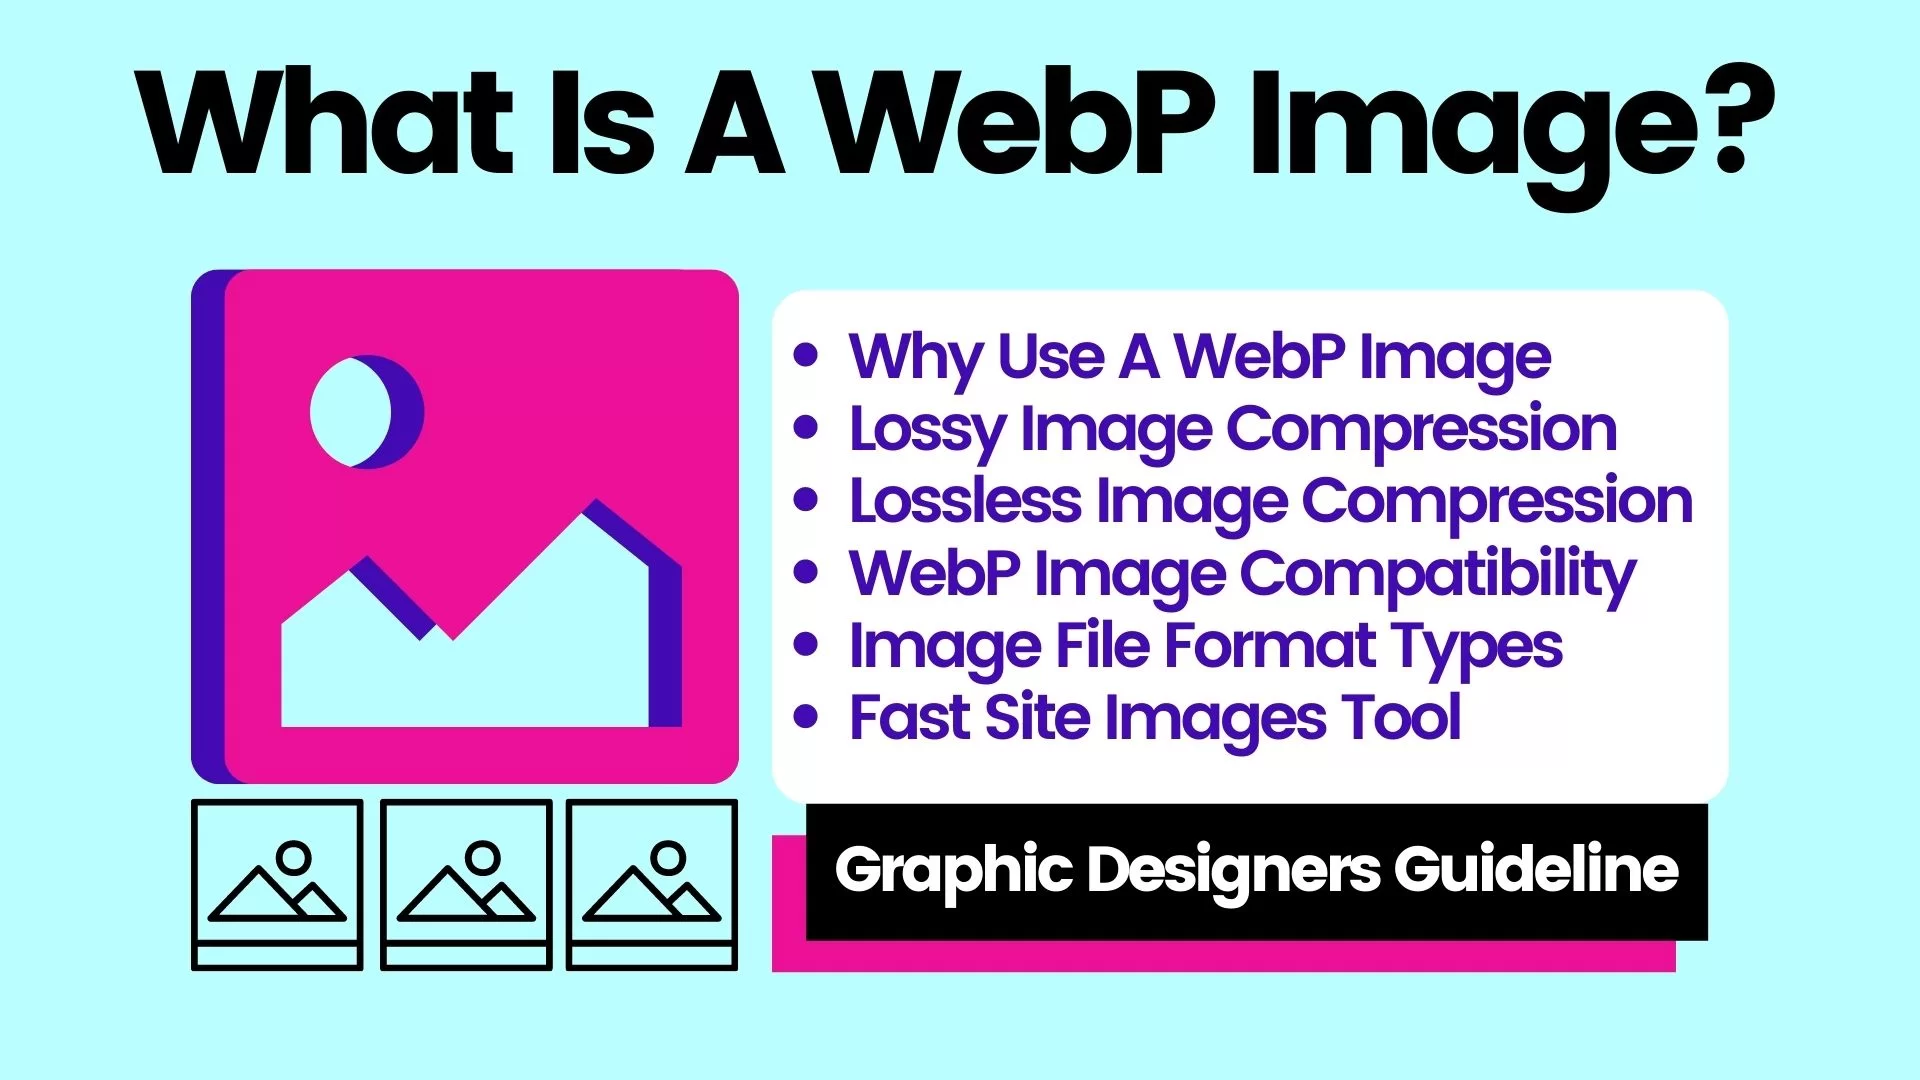 What Is A WebP Image?